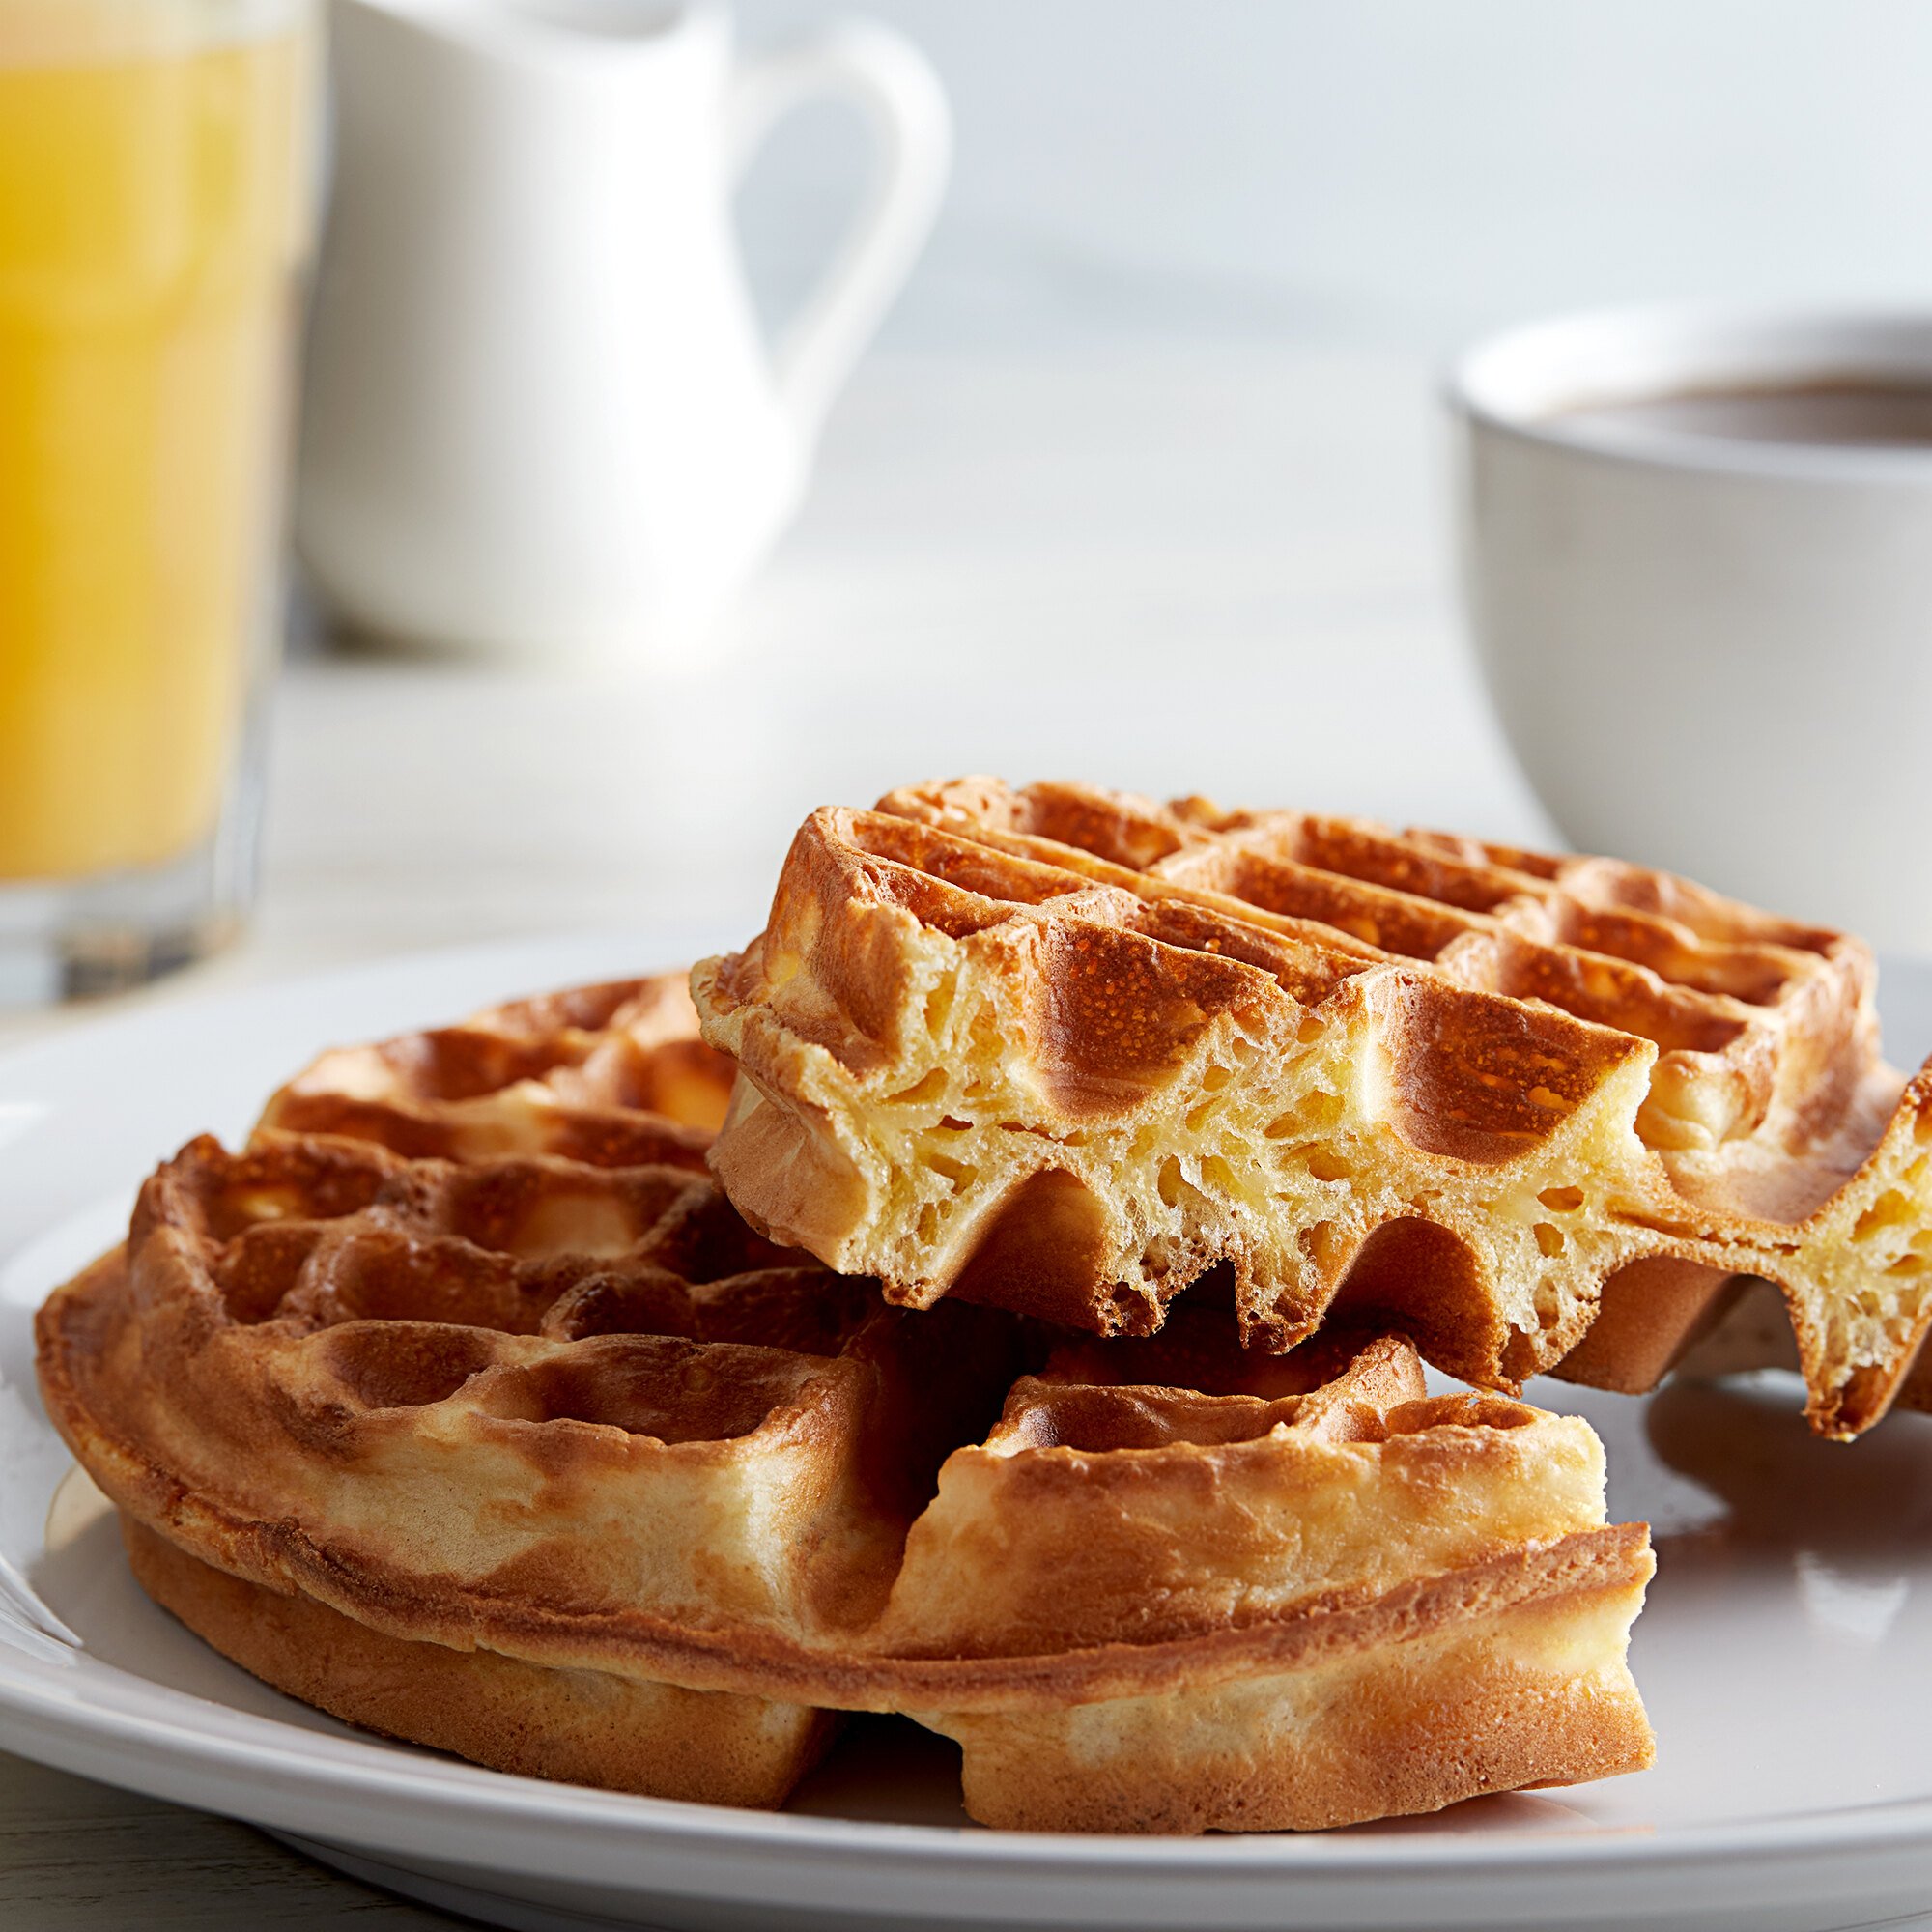 Two belgian waffles on white plate in front of glass or orange juice and cup of coffee